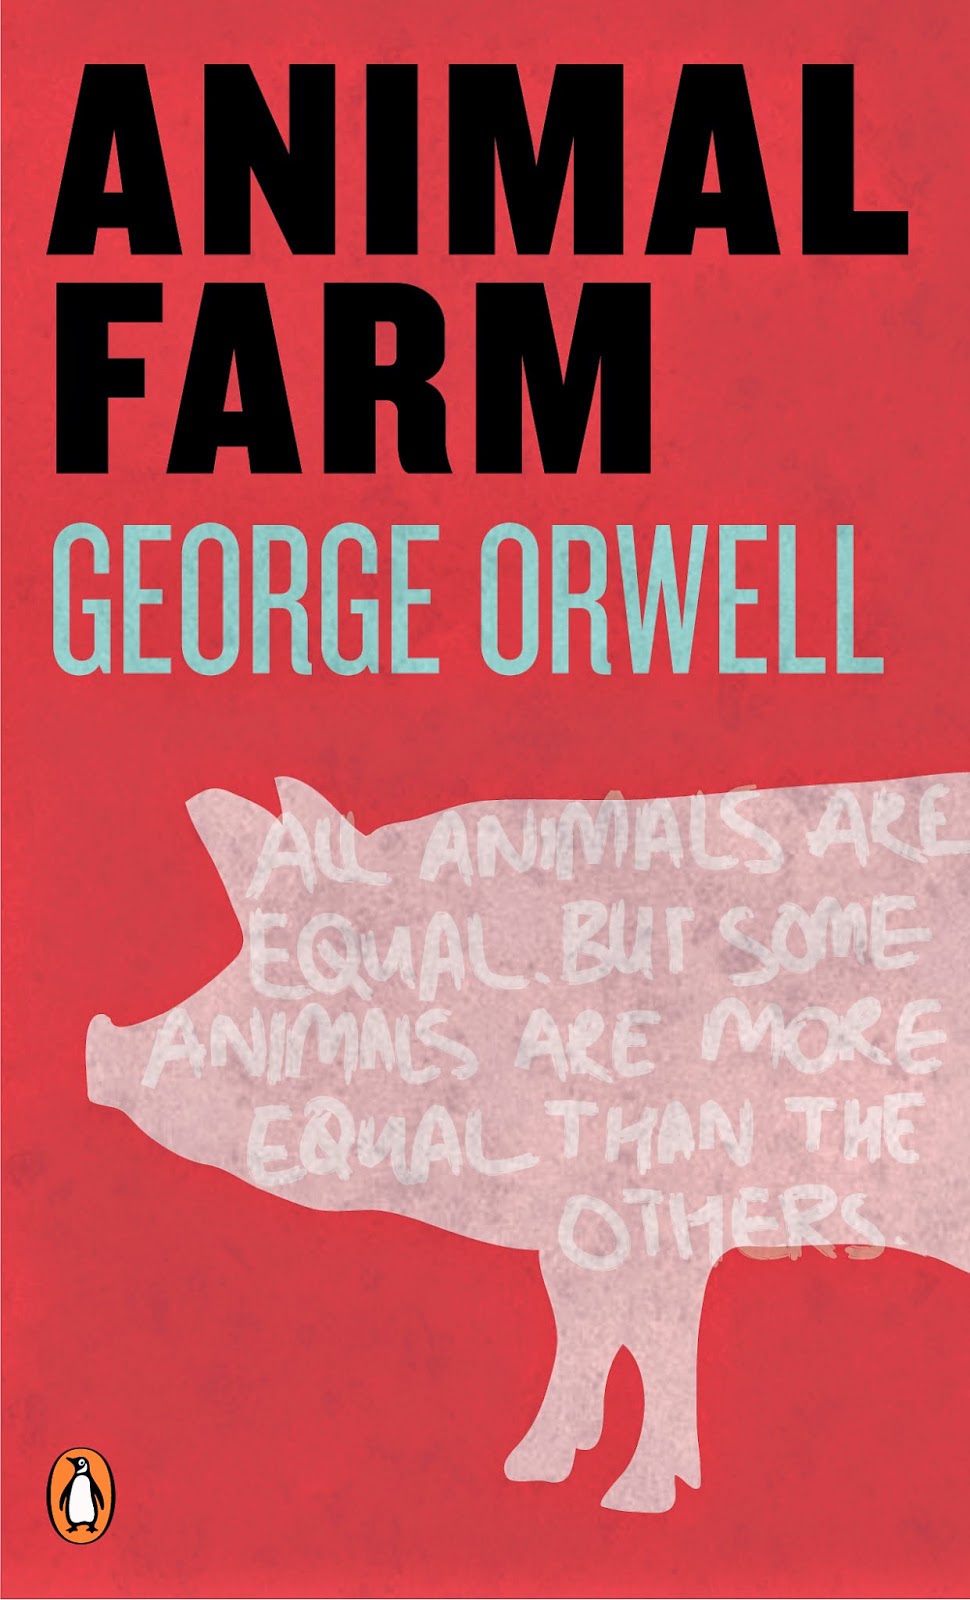 animal farm morals and messages